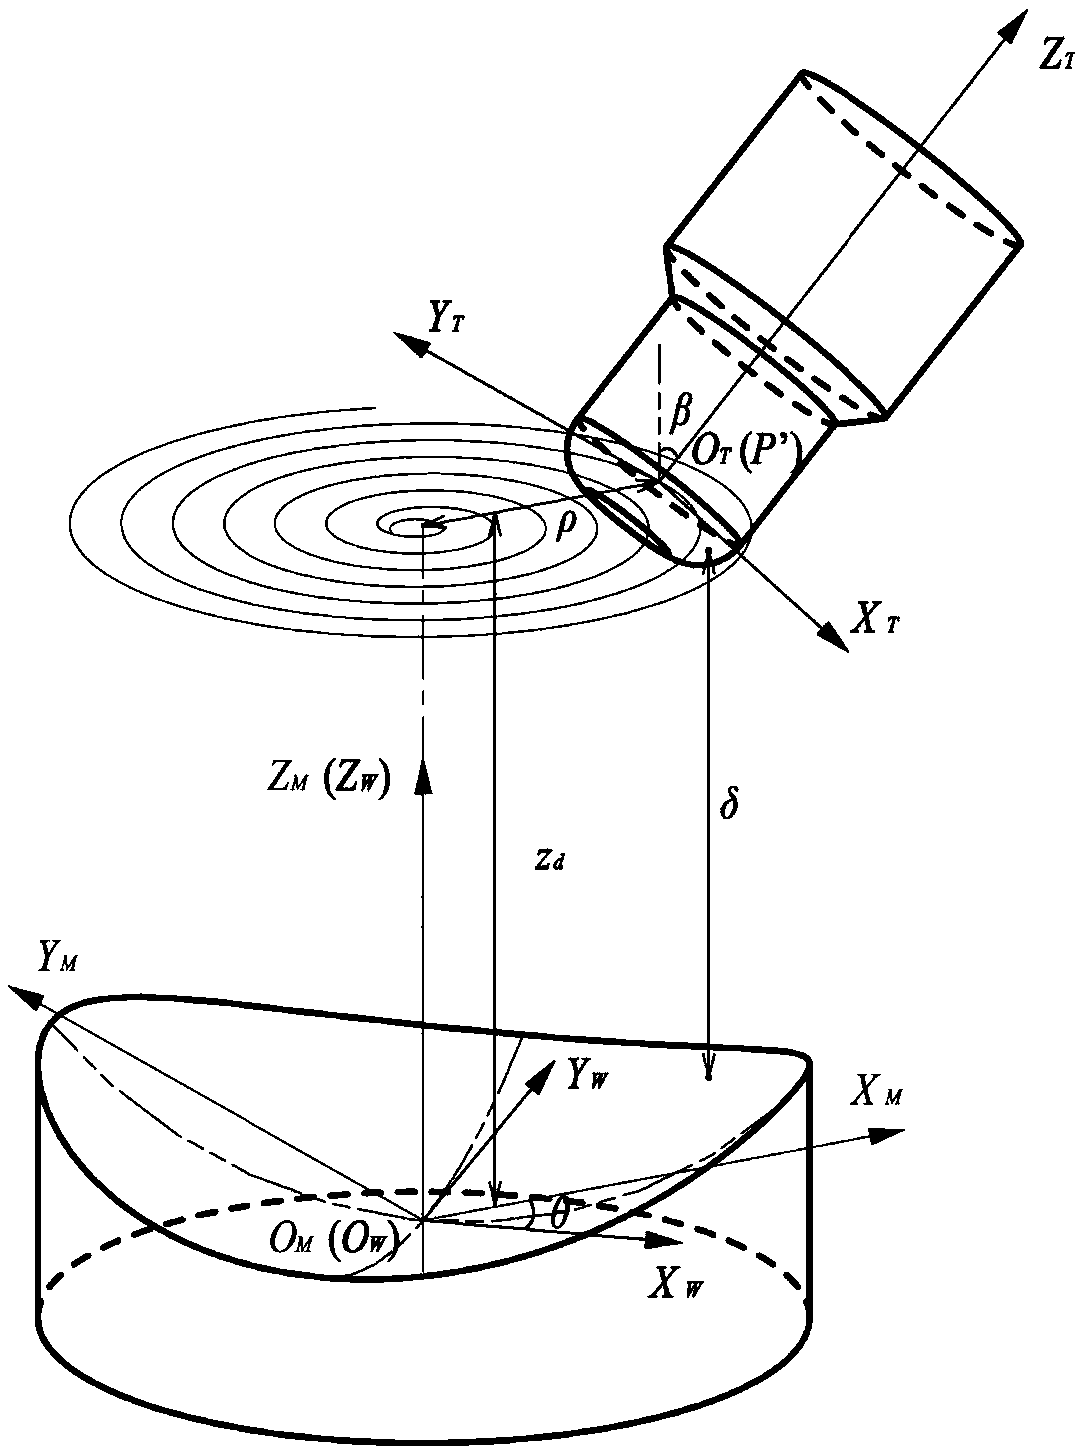 Grinding wheel path generation method for tilting-axis single-point grinding of free-form curved surface